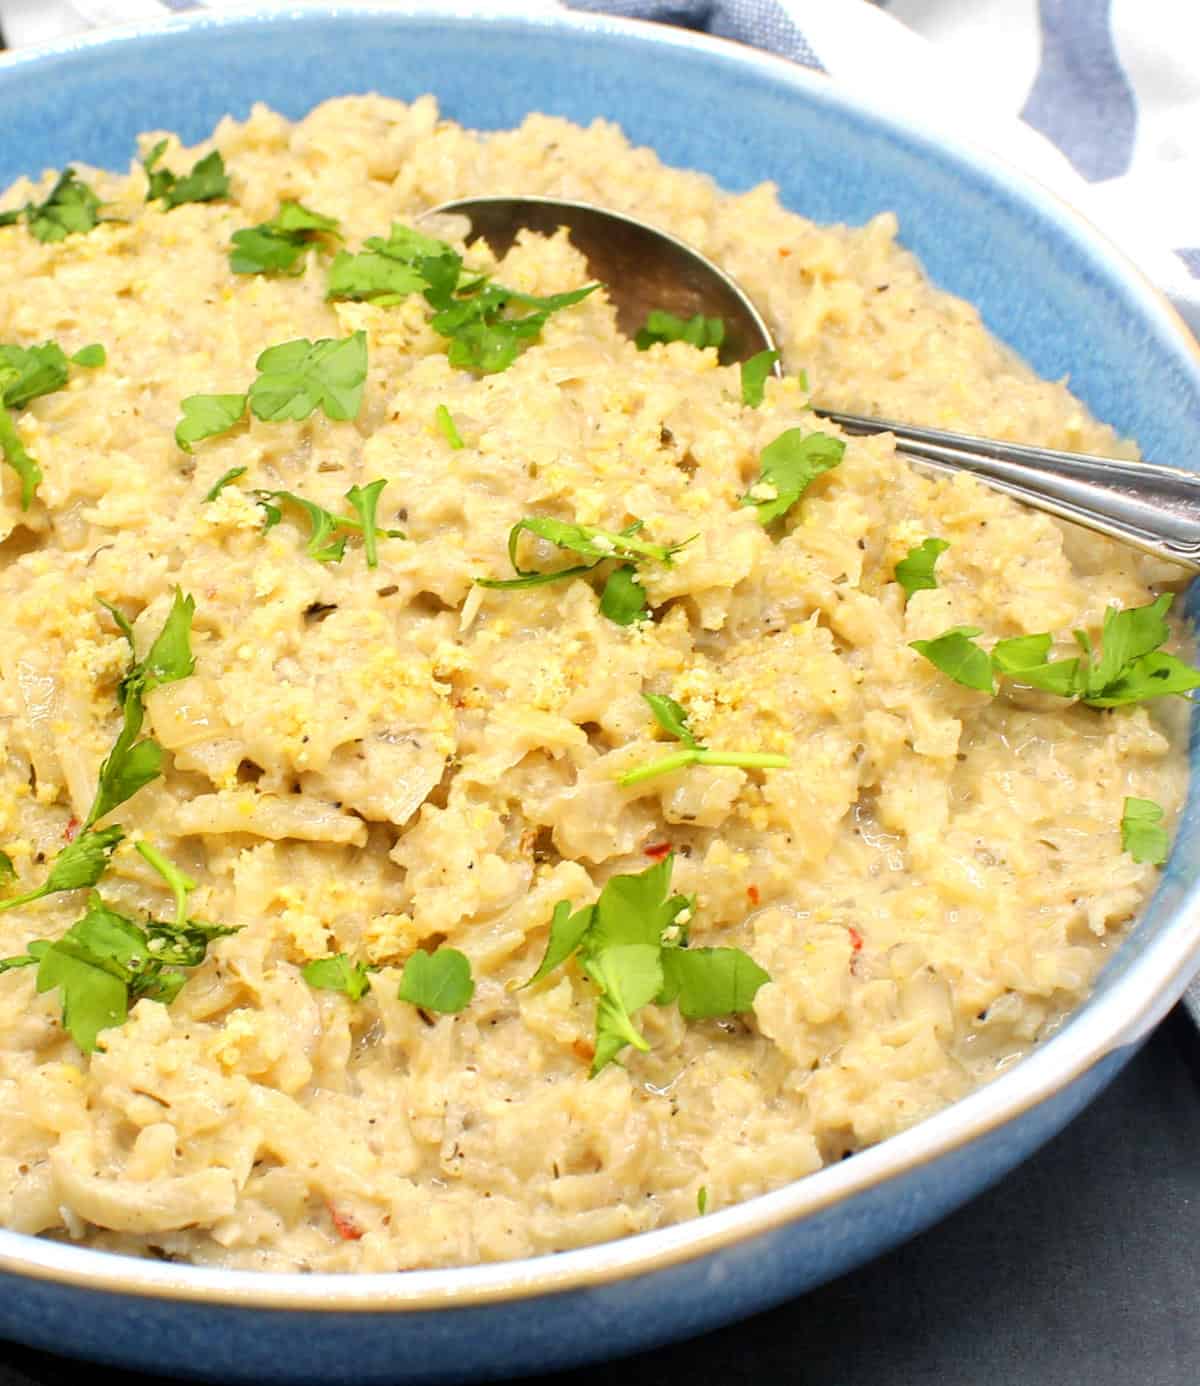 Creamy cauliflower risotto in blue bowl with spoon.